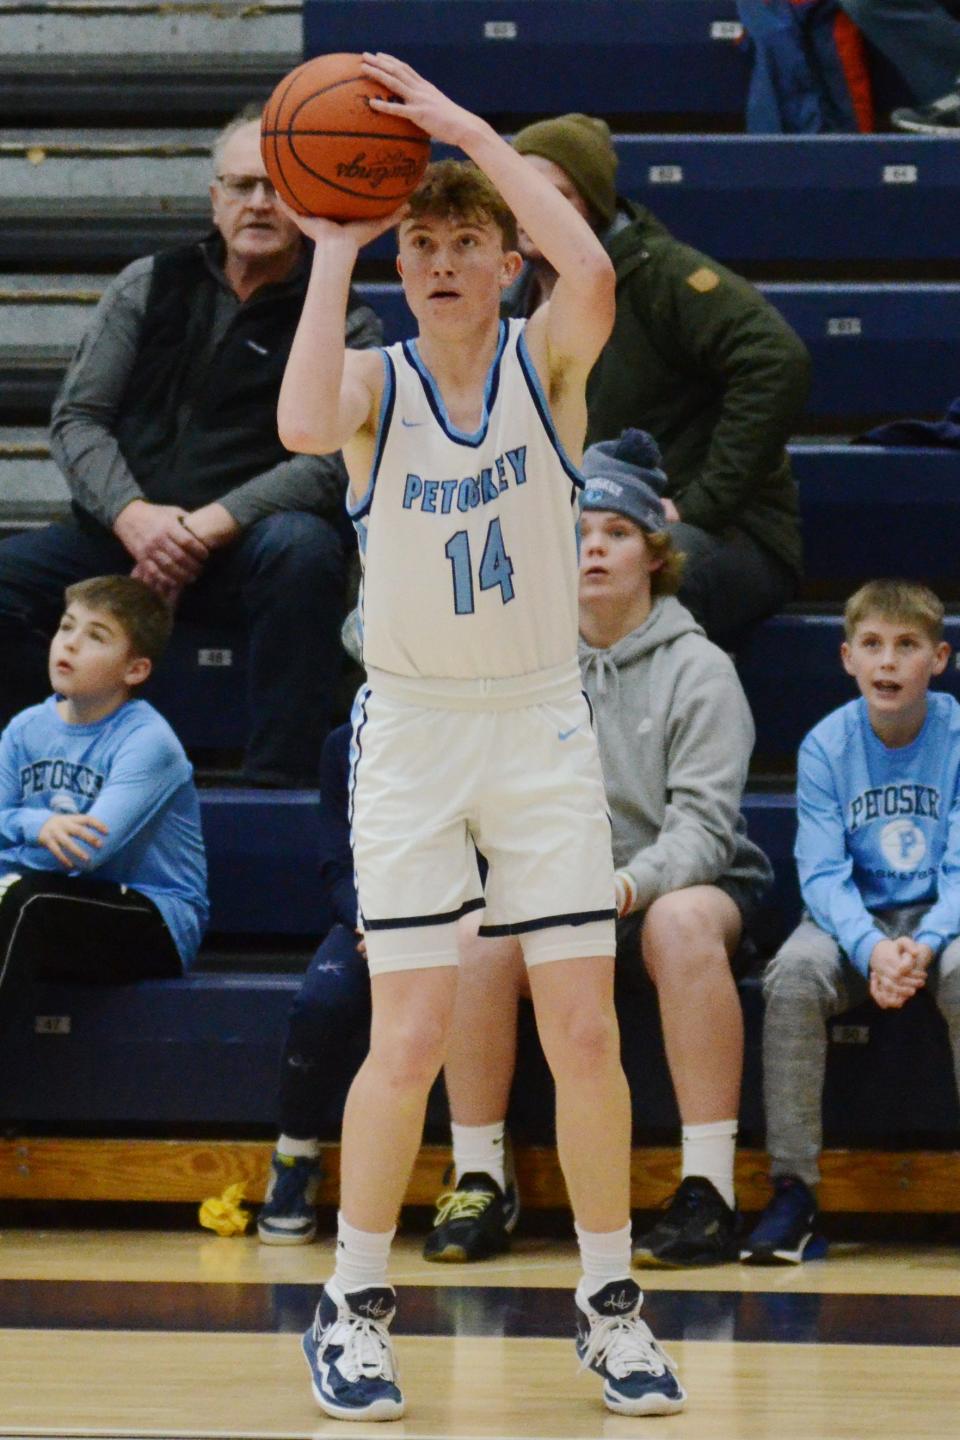 Petoskey's Dylan Odenbach lines up a corner 3-pointer in the second half Tuesday vs. TC West.